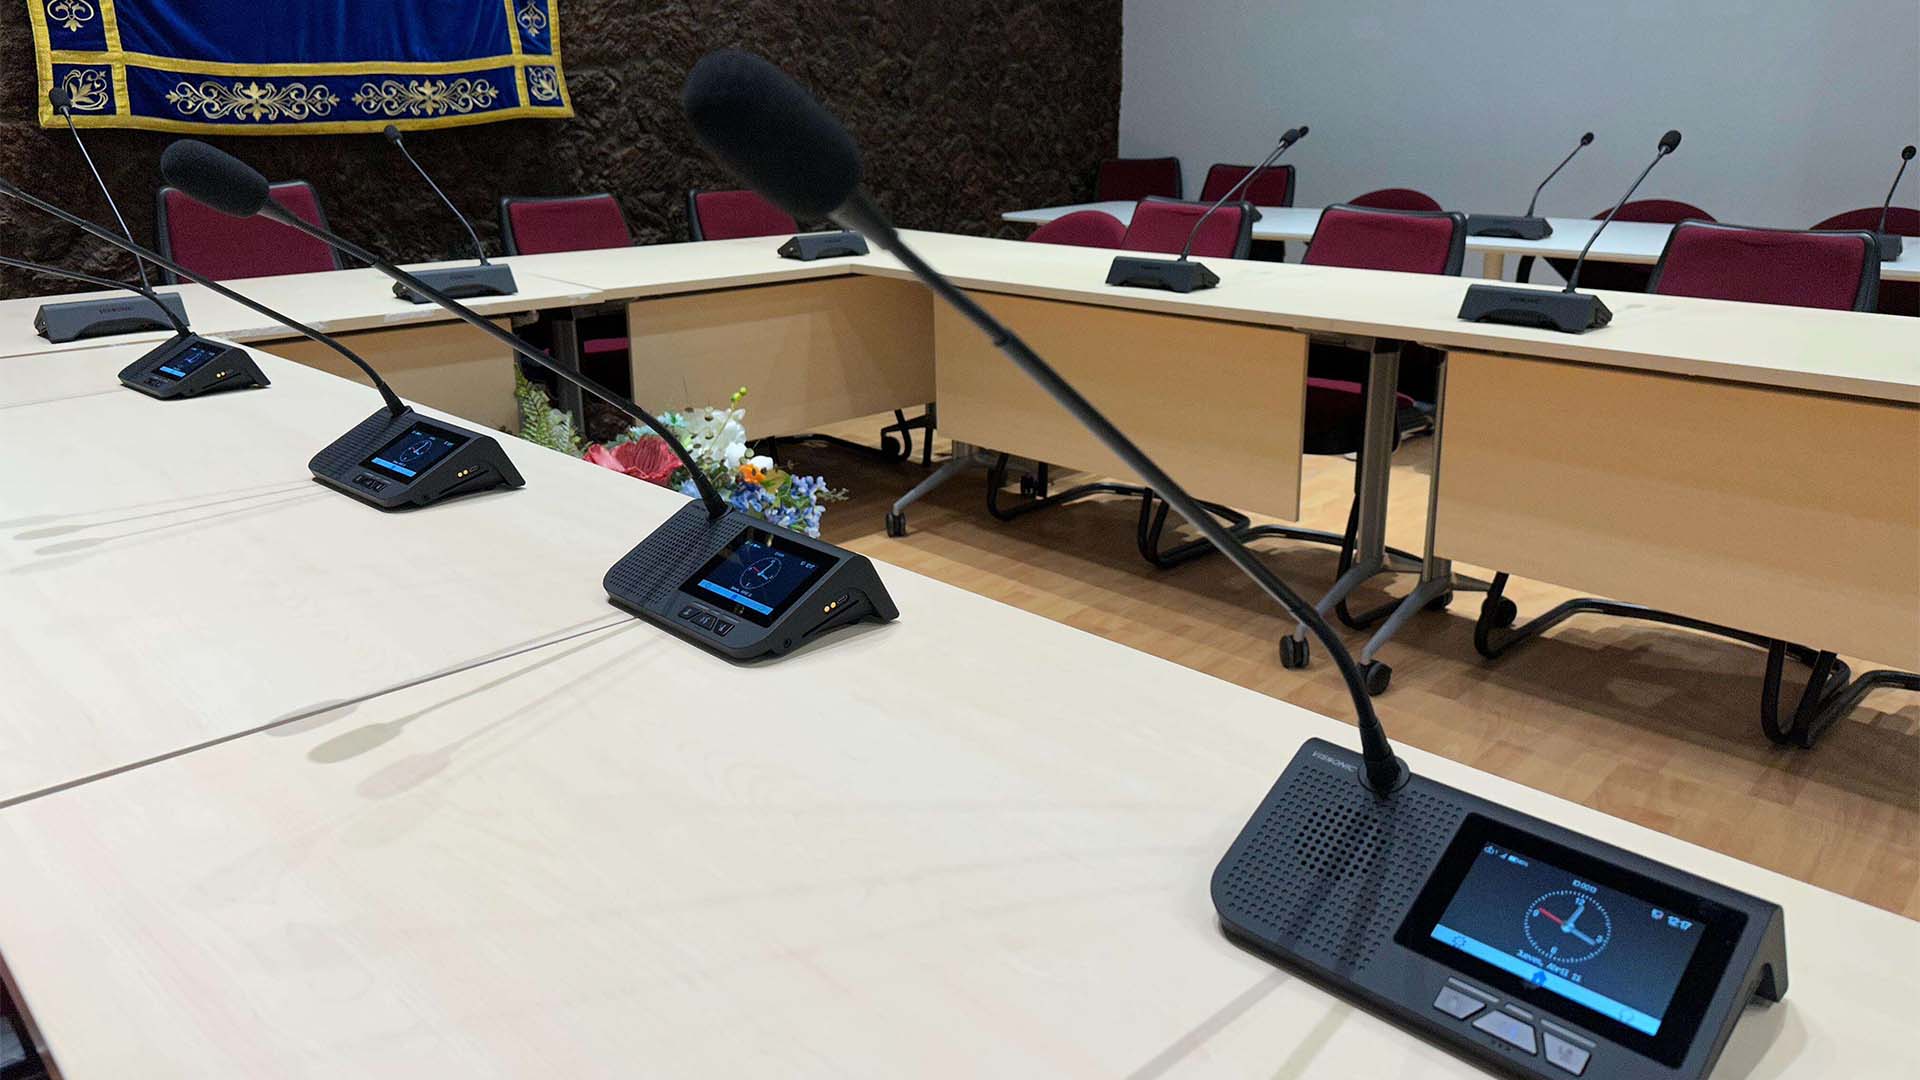 Streamlined Meetings: Wireless Multimedia Conference System at Spain City Council